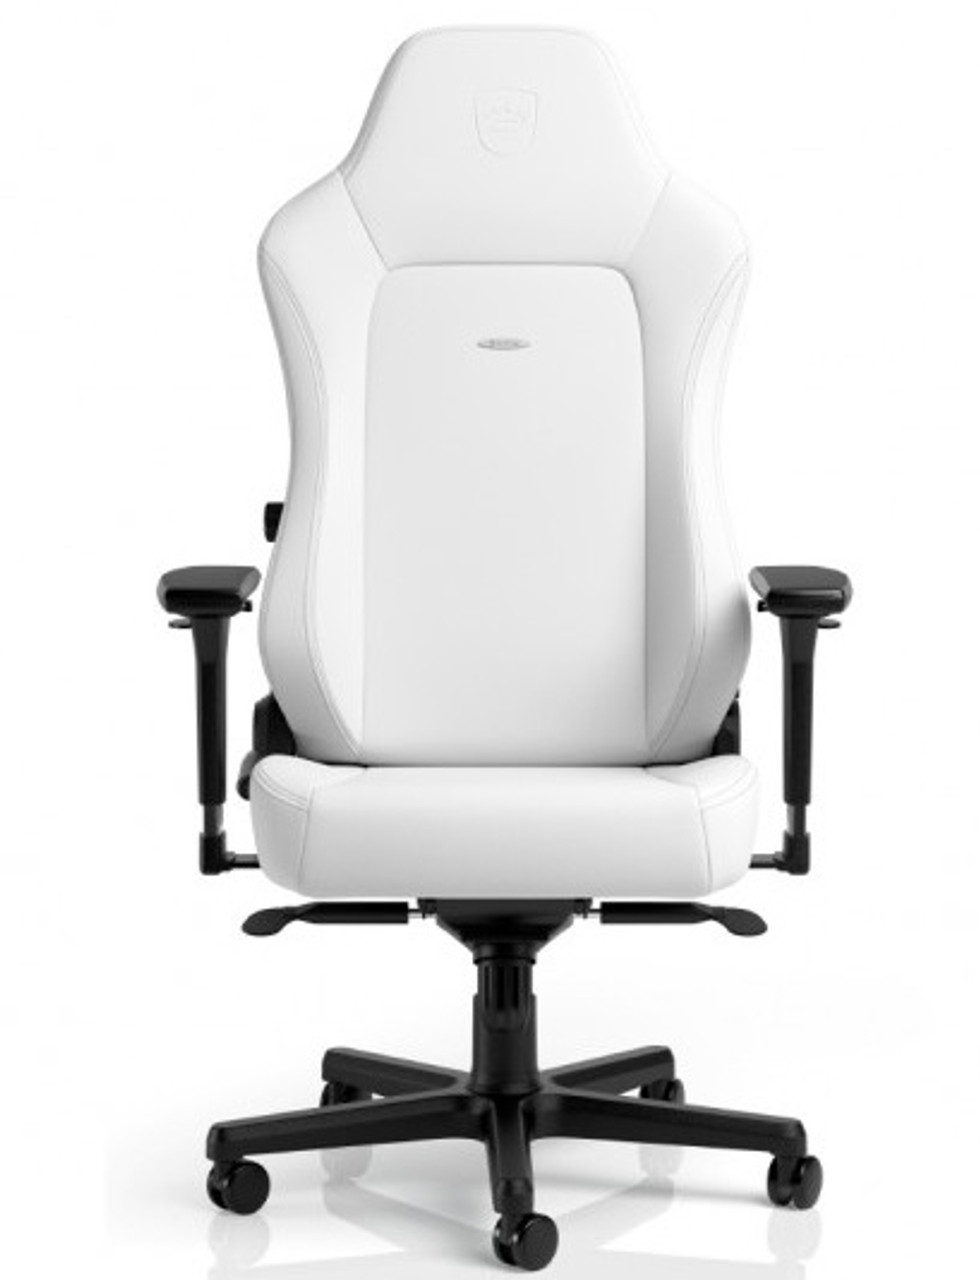 noblechairs (@noblechairs) / X